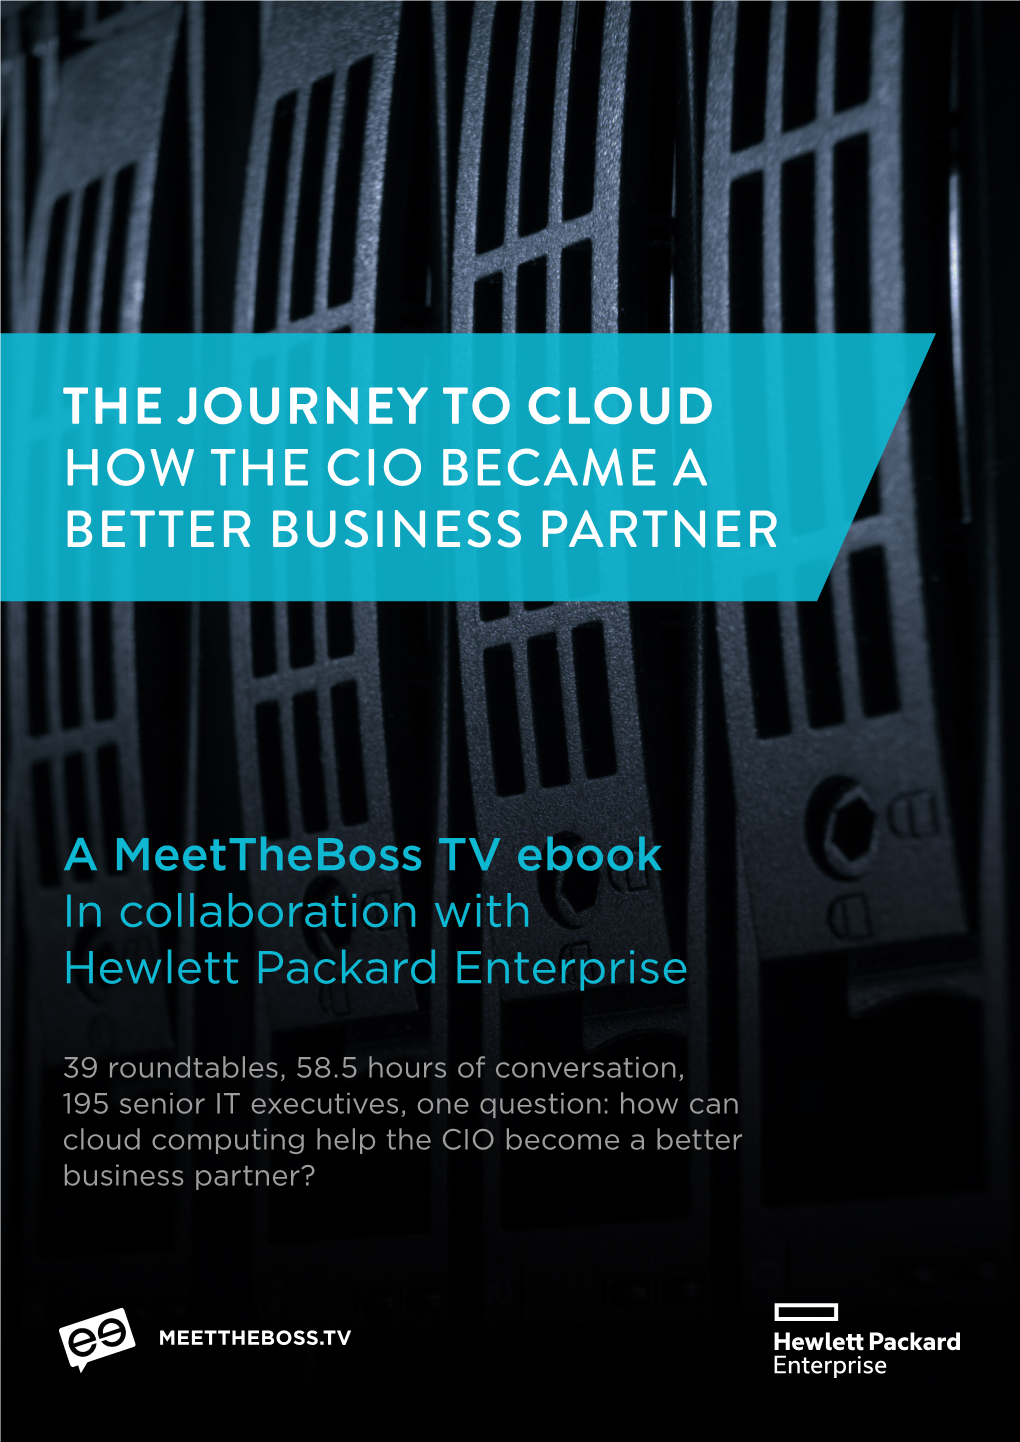 The Journey to Cloud How the Cio Became a Better Business Partner